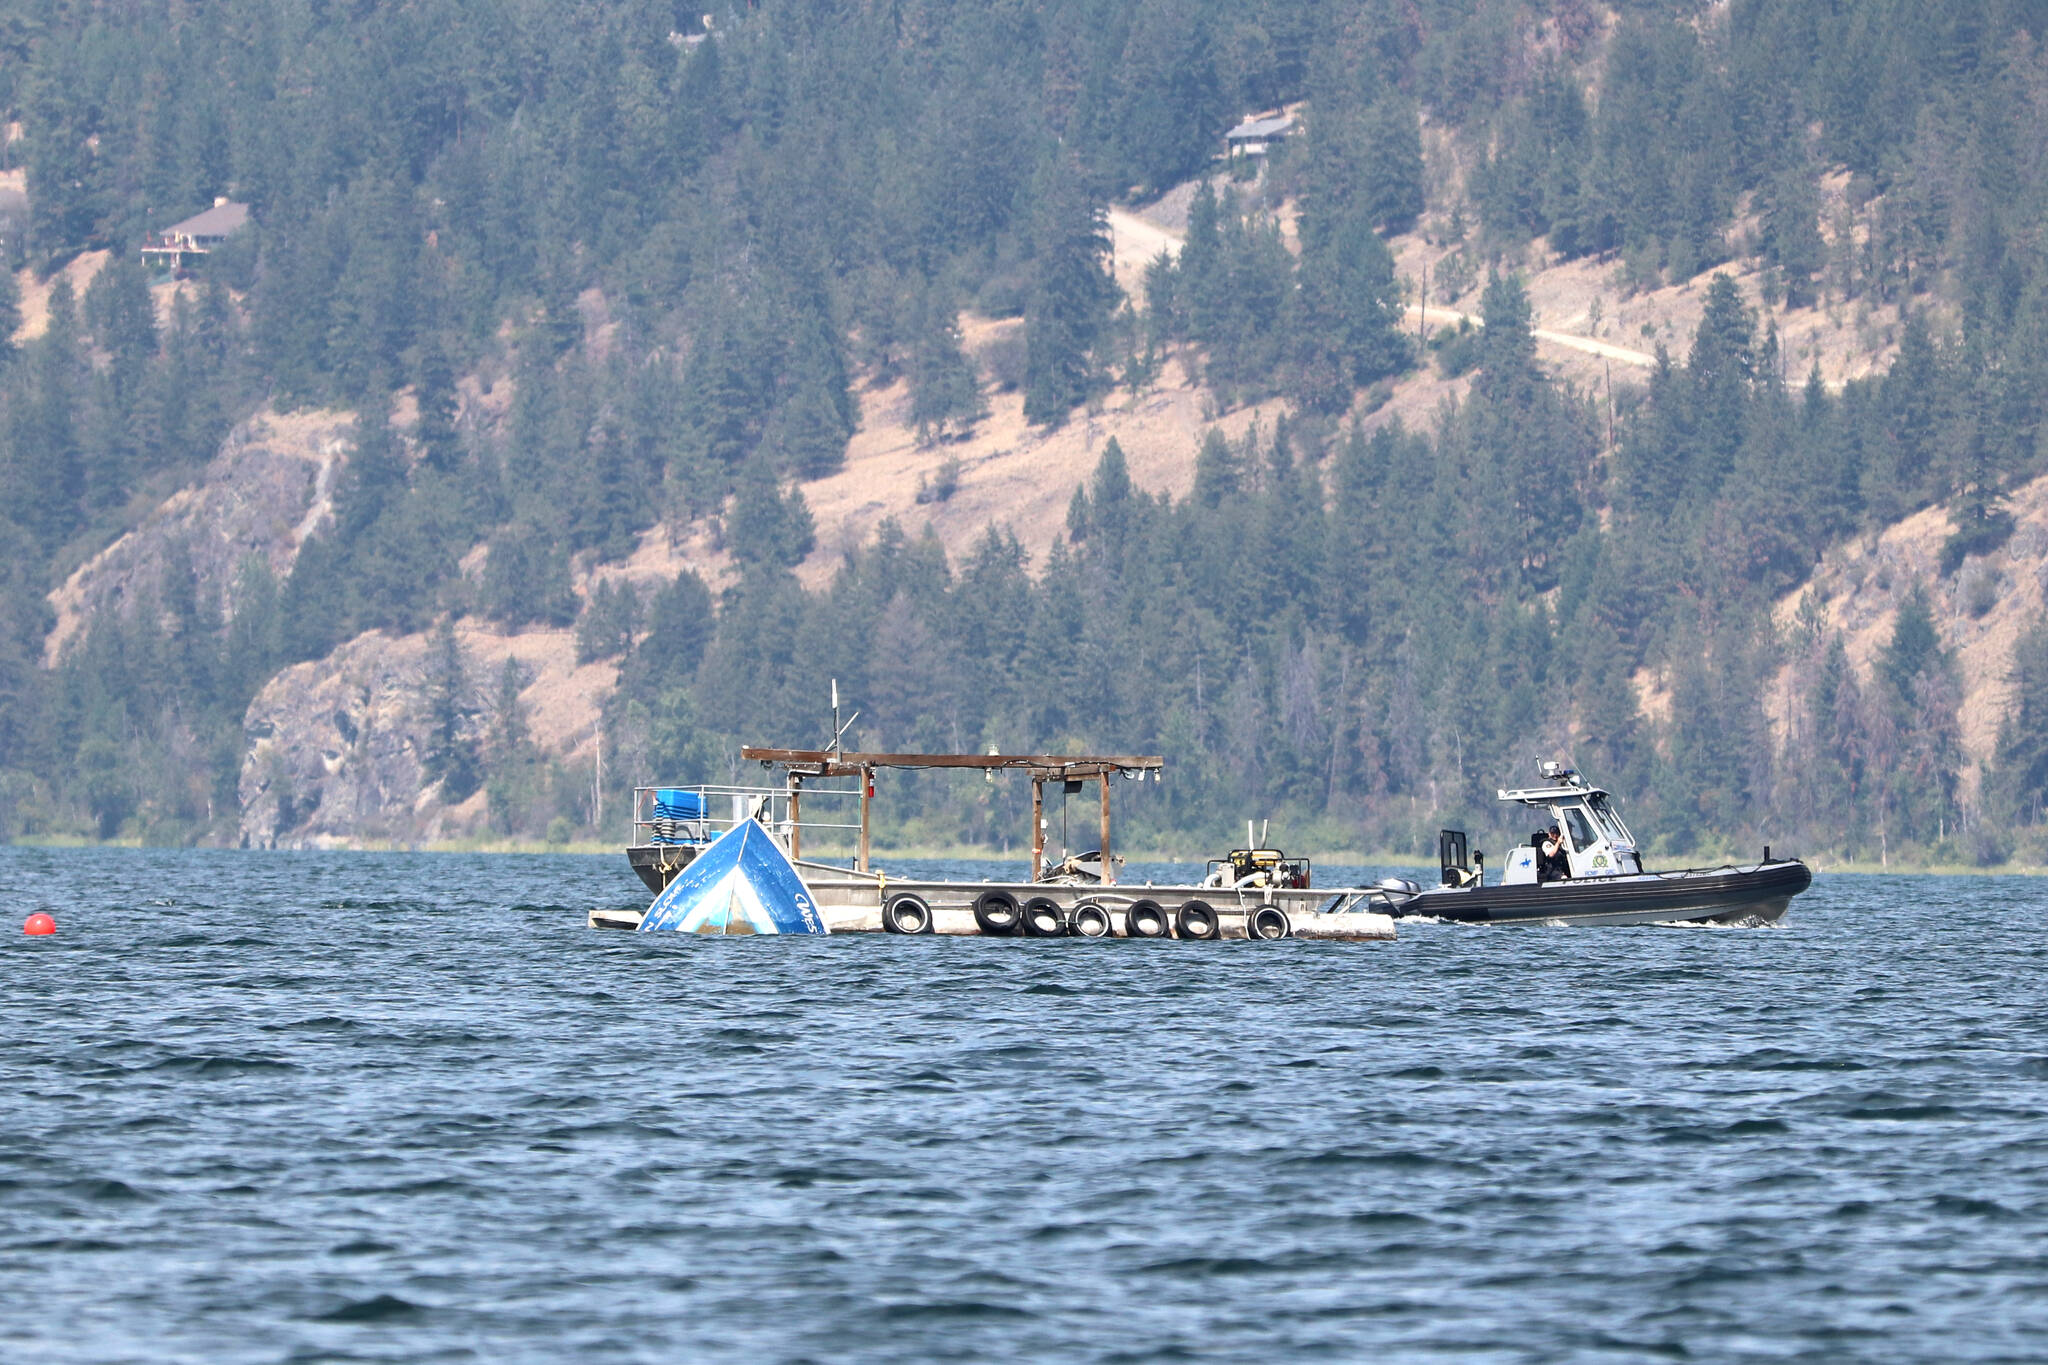 An RCMP boat circles the wreckage of a commercial fishing boat in Okanagan Lake, where the captain has not resurfaced or been found since overturning Monday, July 24. (Jennifer Smith - Morning Star)